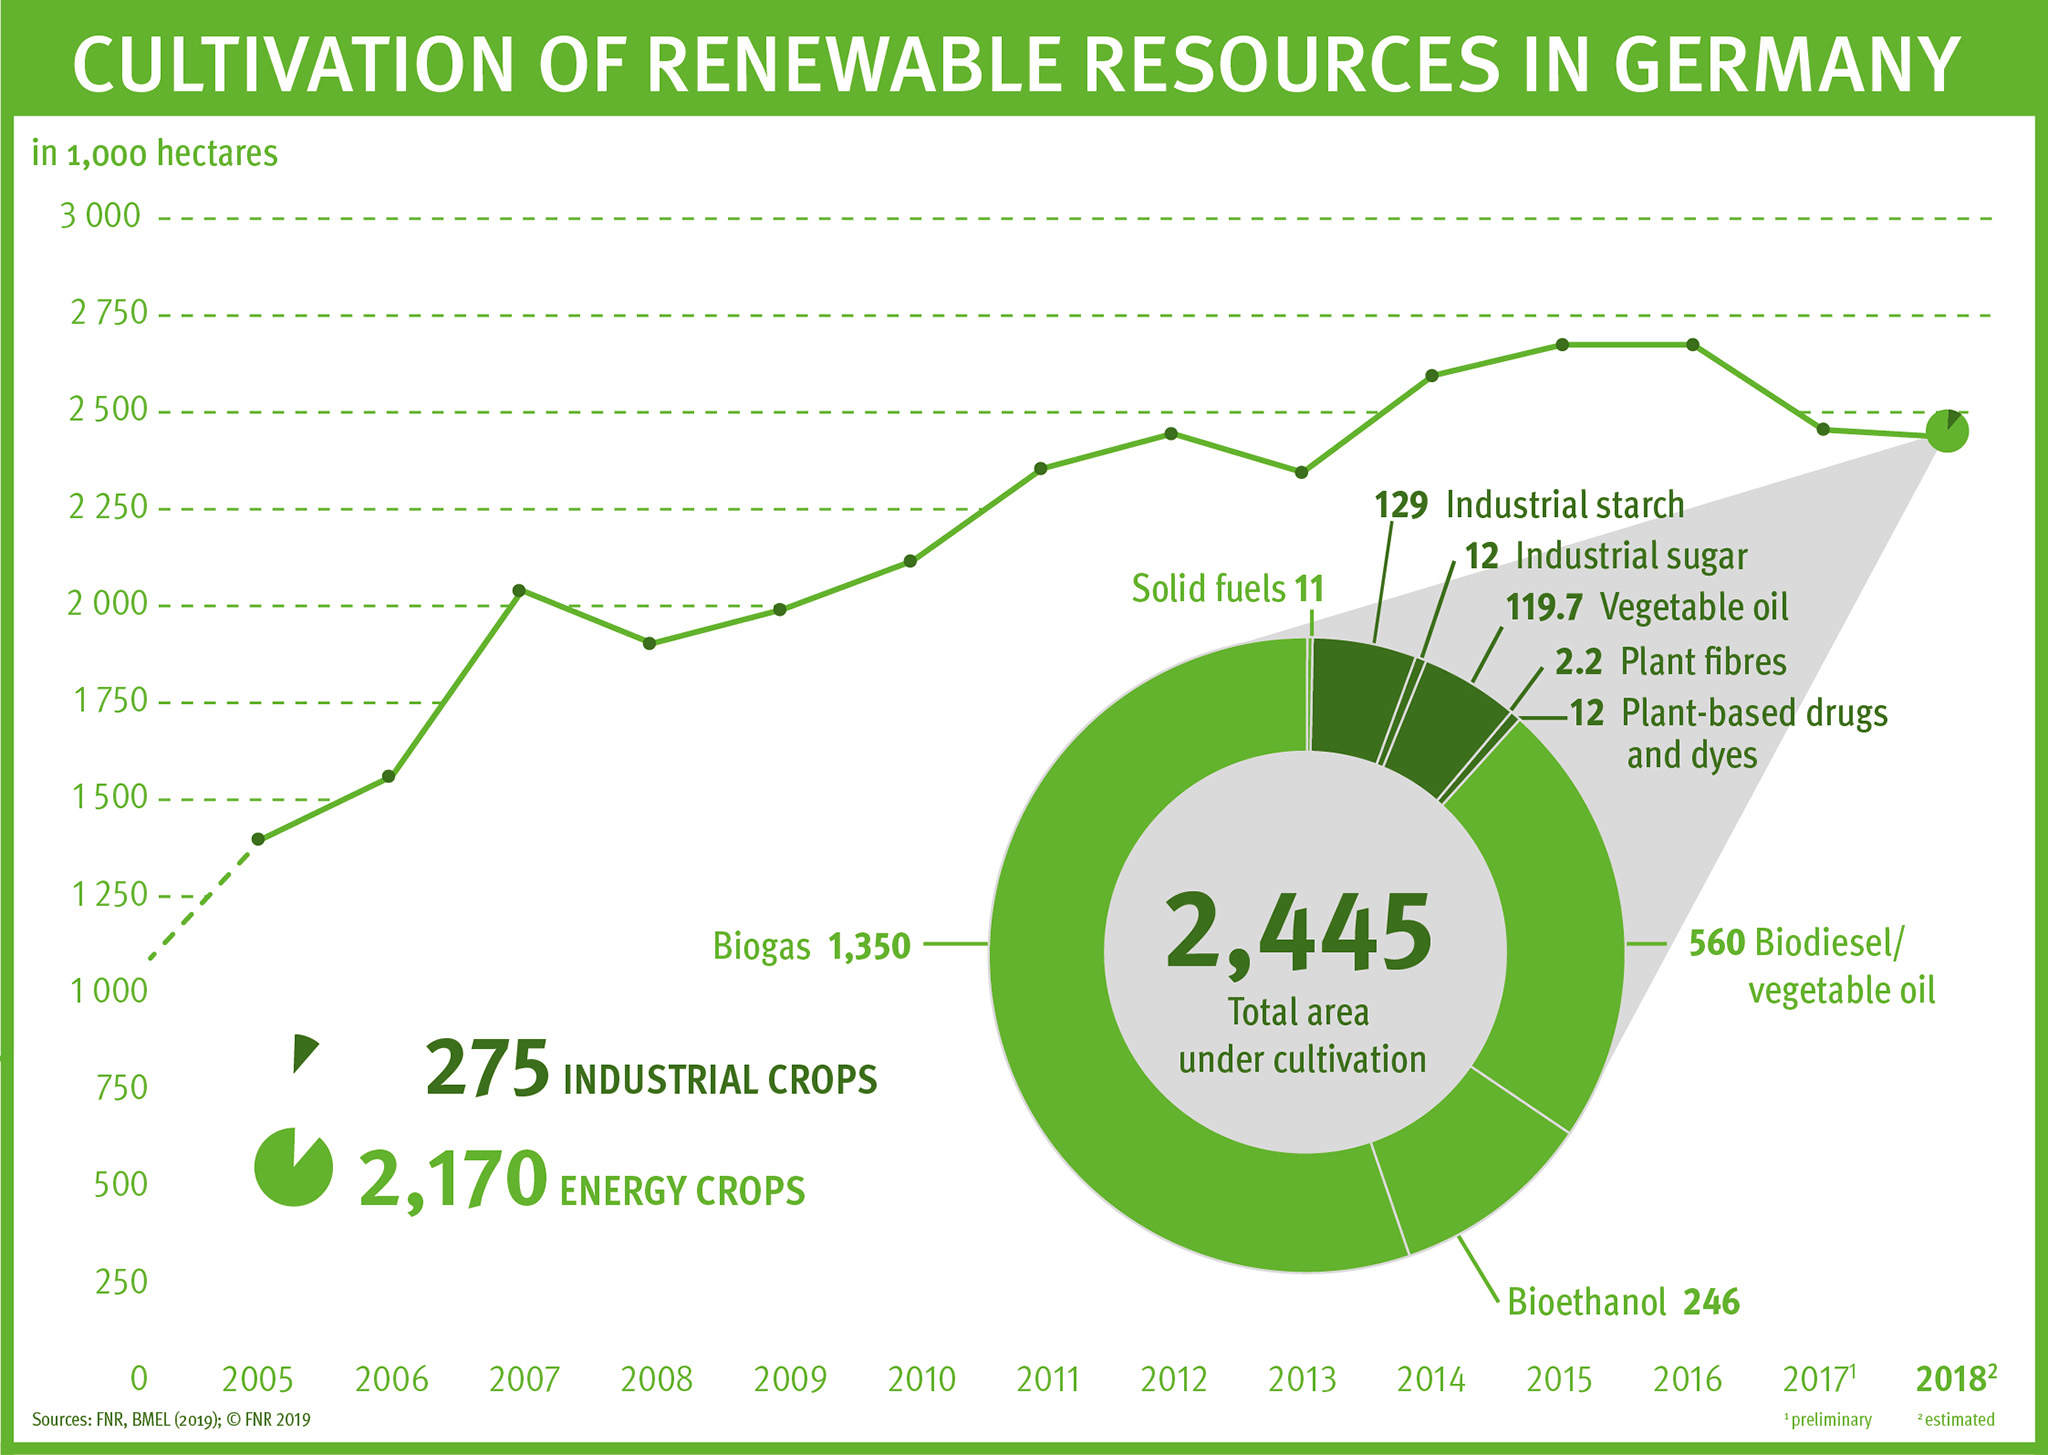 The graph shows the area under cultivation of renewable raw materials in Germany from 2005 to 2017.